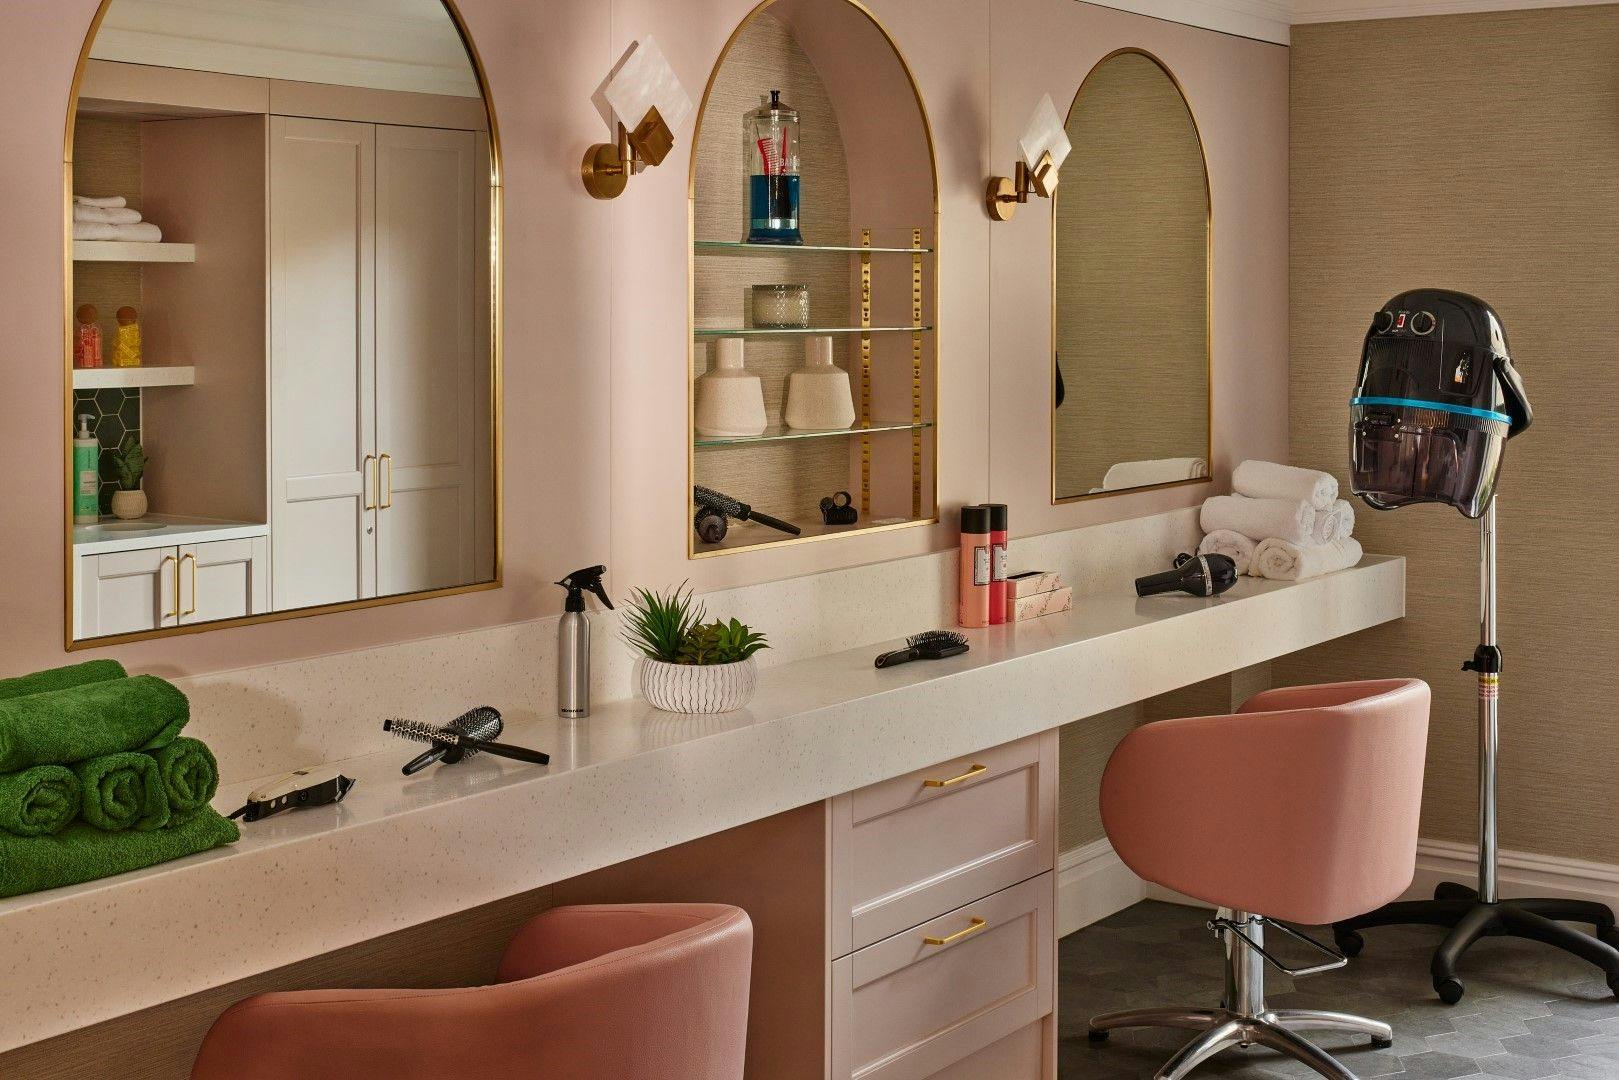 Salon at Midford Manor Care Home in Bath, Somerset